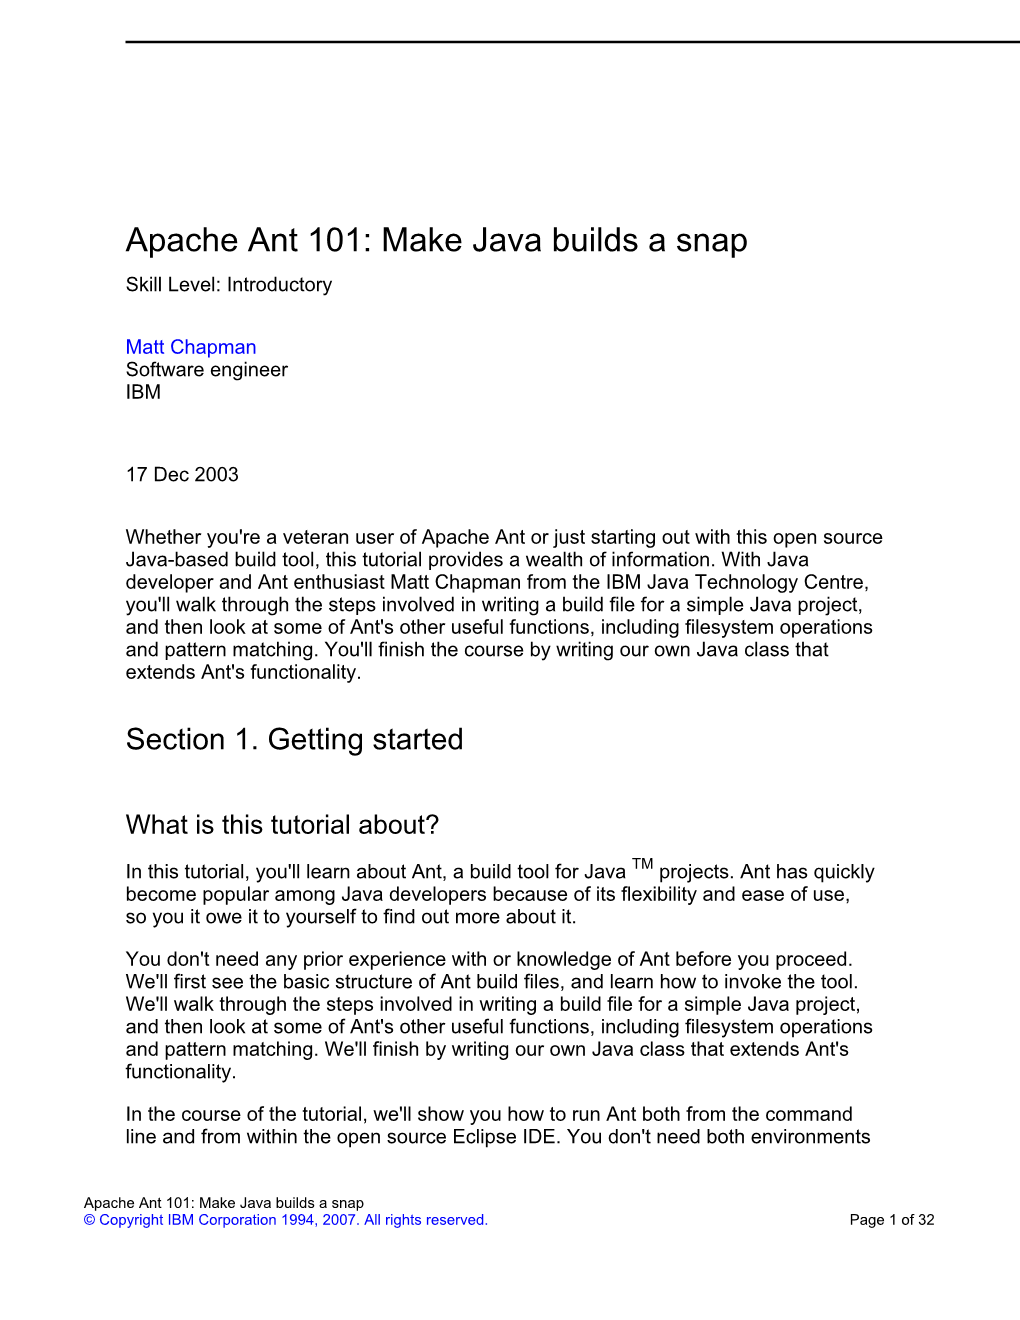 Apache Ant 101: Make Java Builds a Snap Skill Level: Introductory